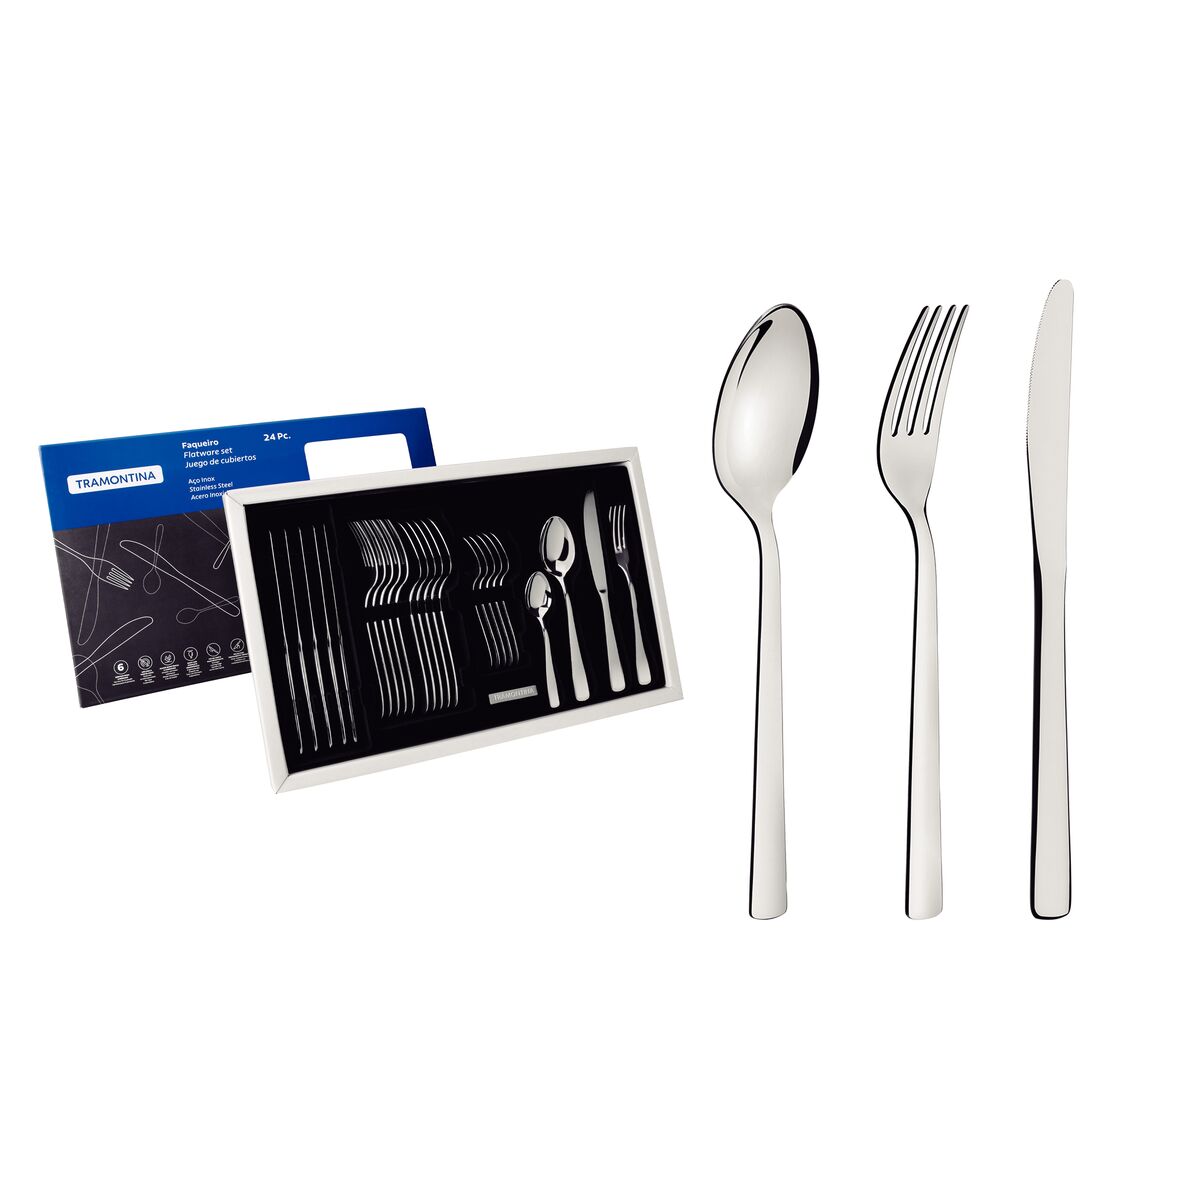 Tramontina Oslo stainless steel flatware set with table knives and mirror finish, 24 pc set